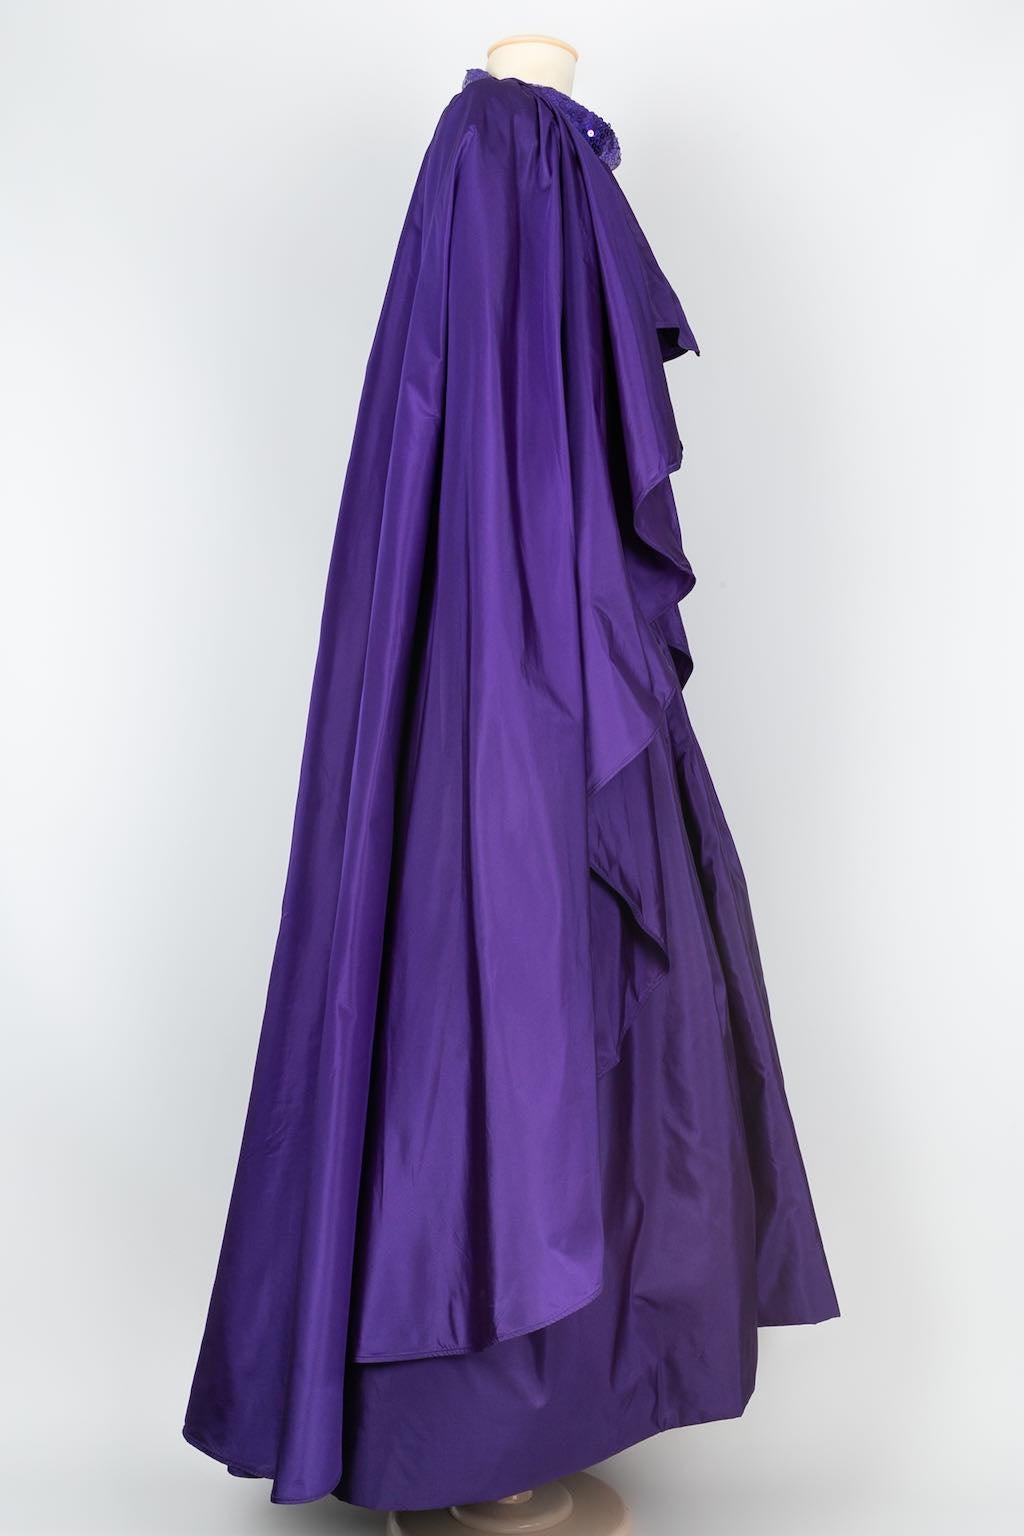 Azzaro -(Made in France) Evening dress with a taffeta cape embroidered with sequins. No label of composition or size indicated, it fits a 40FR. To note, stains present on the back of the cape.

Additional information: 
Dimensions: Dress: Chest: 40